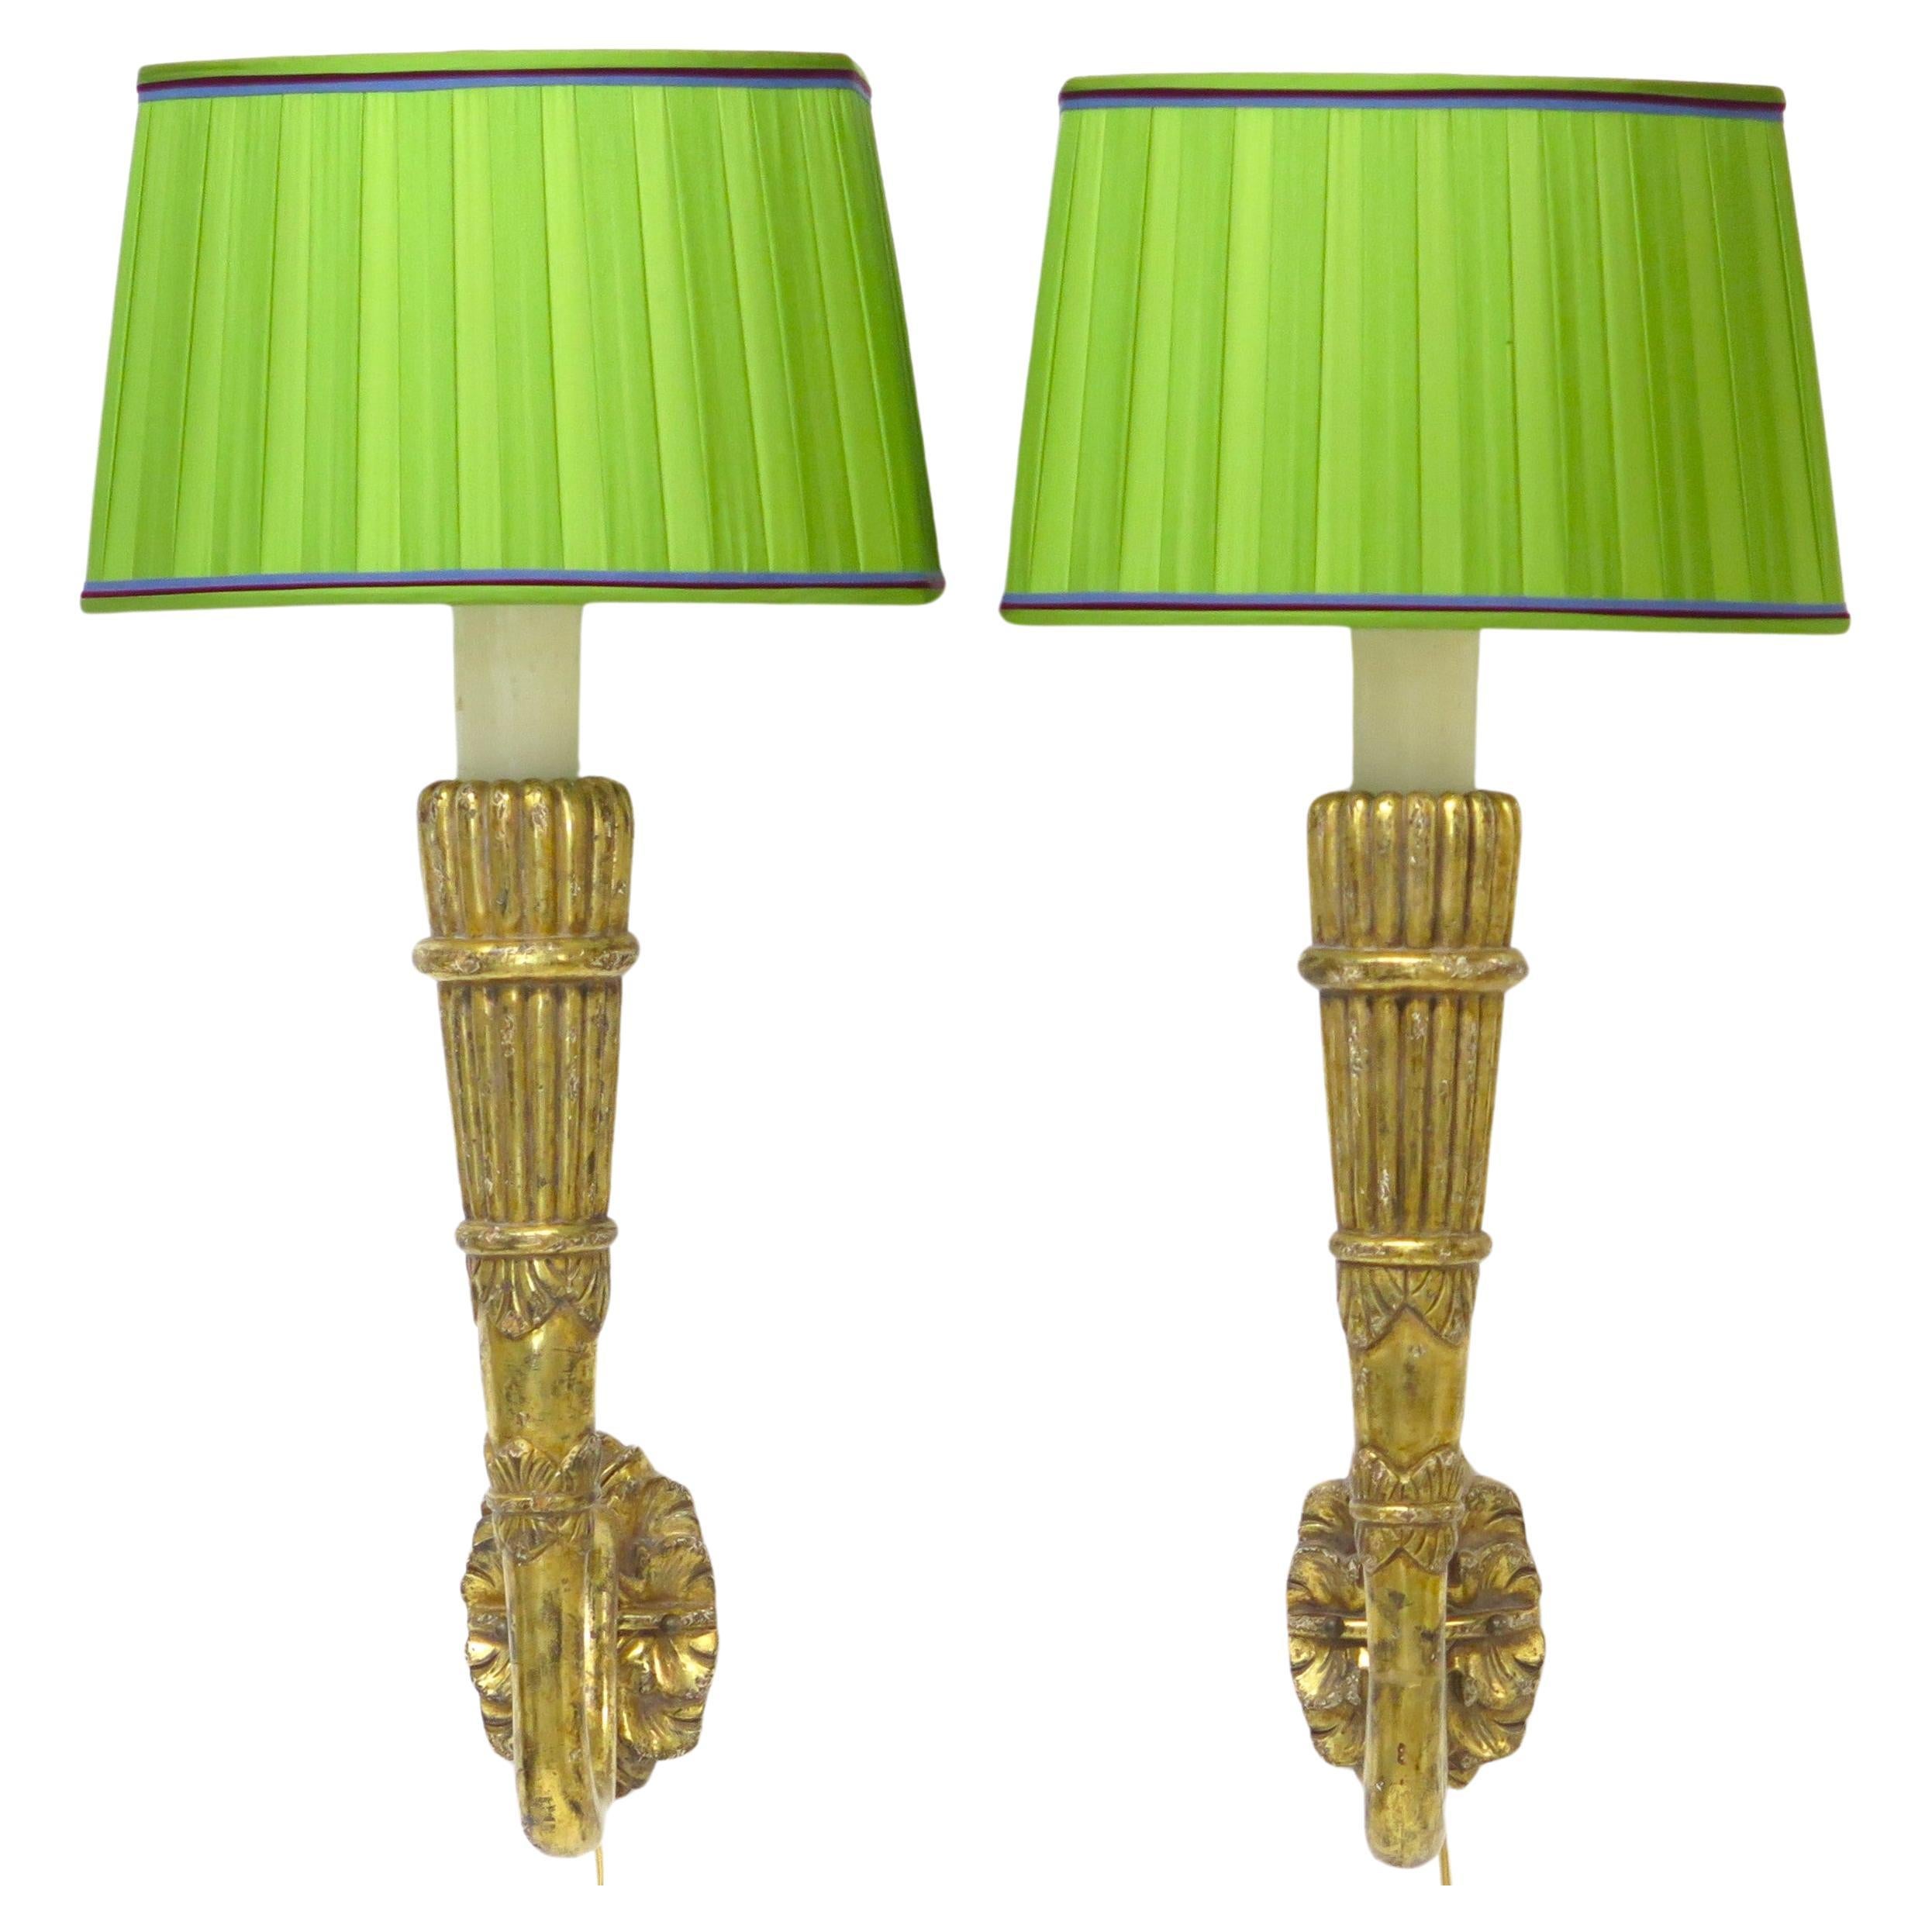 Pair of Art Deco Giltwood Sconces in the Form of Stylized Wall Torches